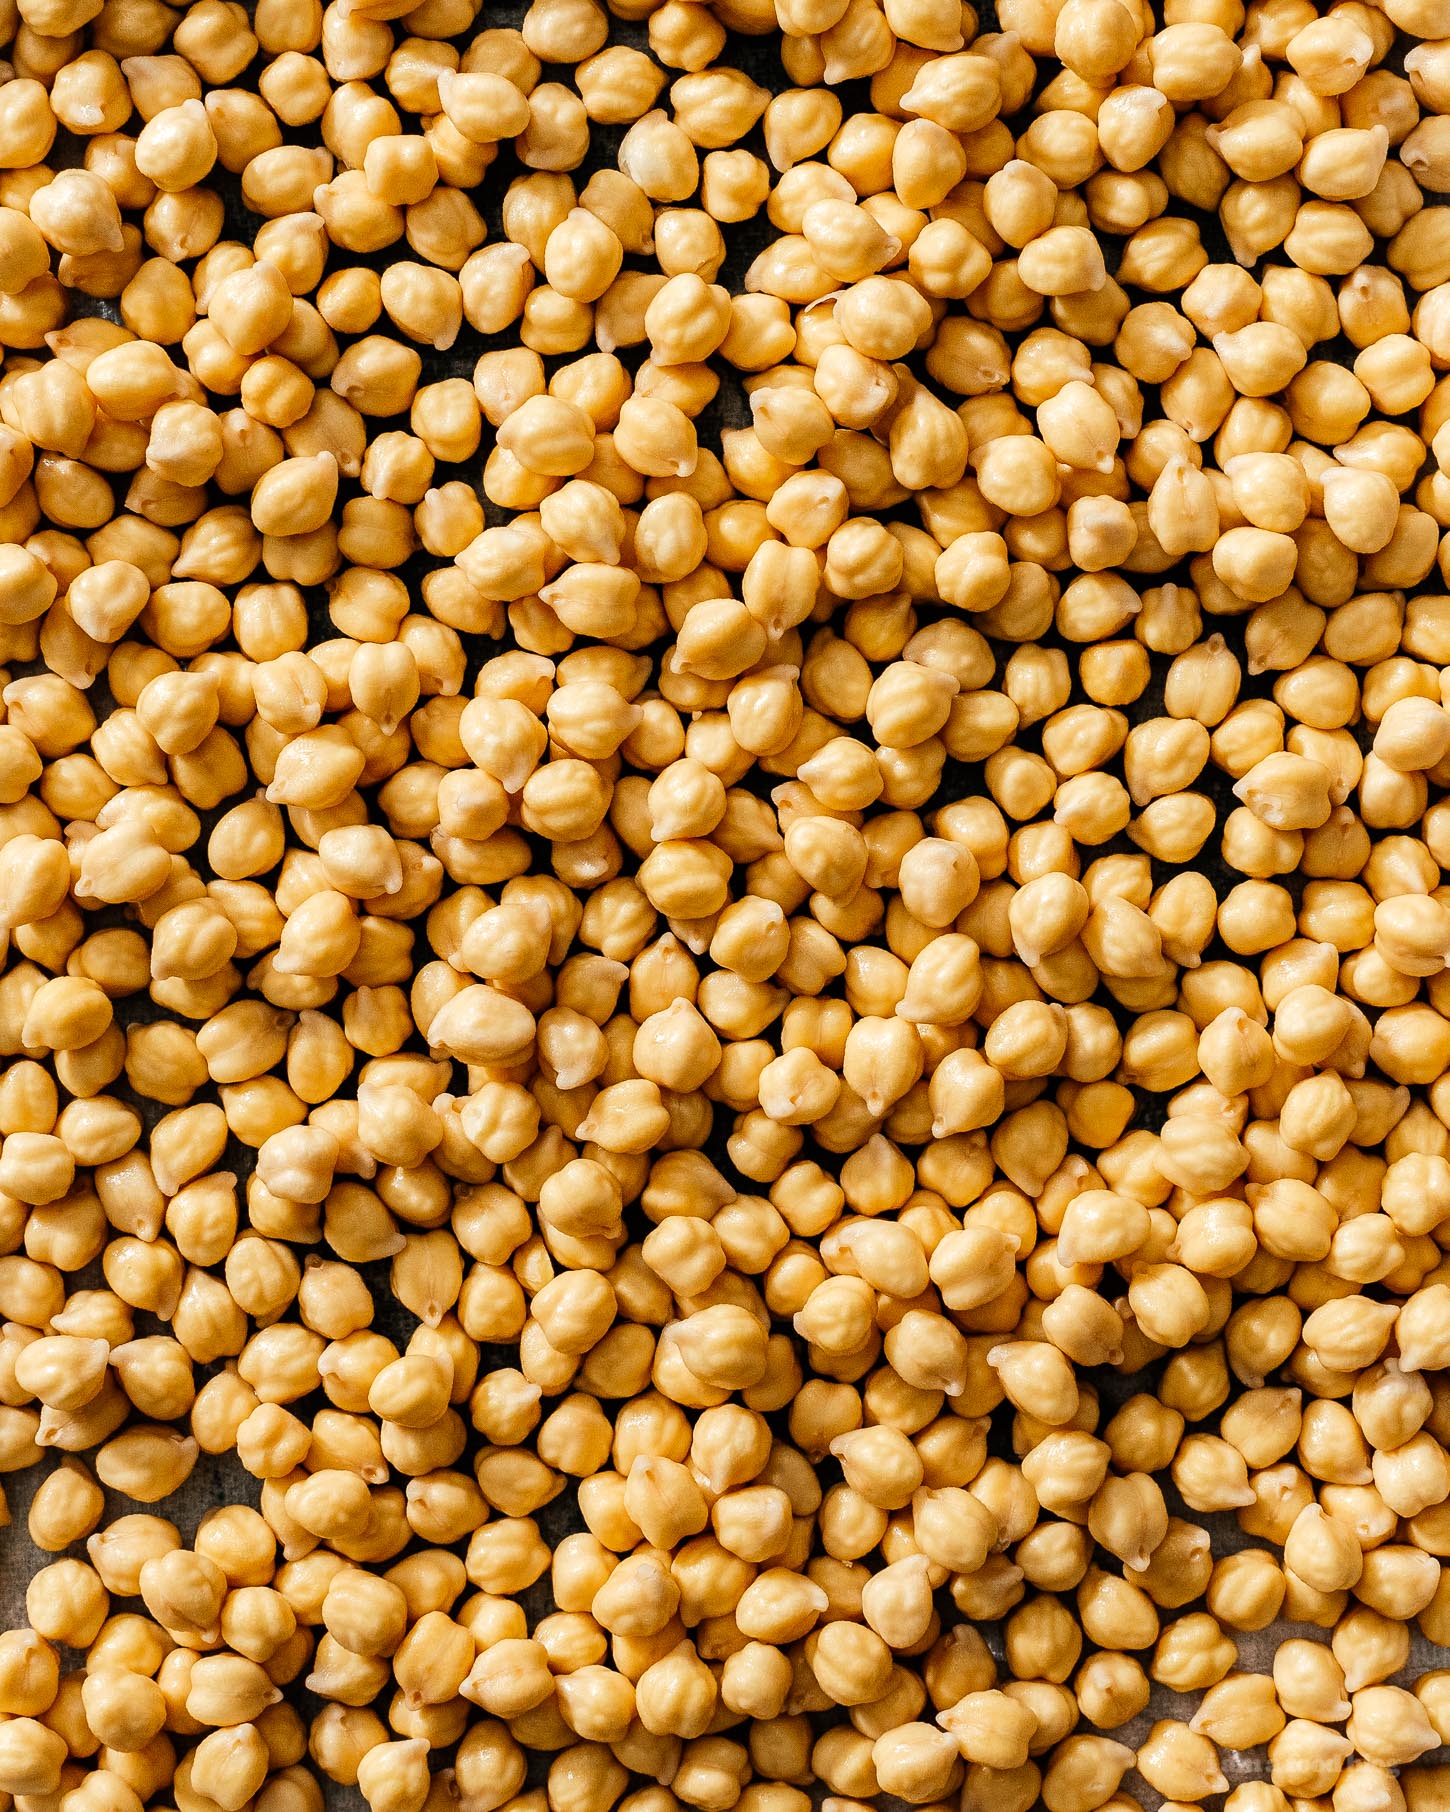 Place chickpeas and 1/2 teaspoon baking soda in a medium bowl and add cold water to cover by 2 inches. Cover and let sit, at room temperature overnight, until chickpeas have doubled in size. Drain and rinse.z